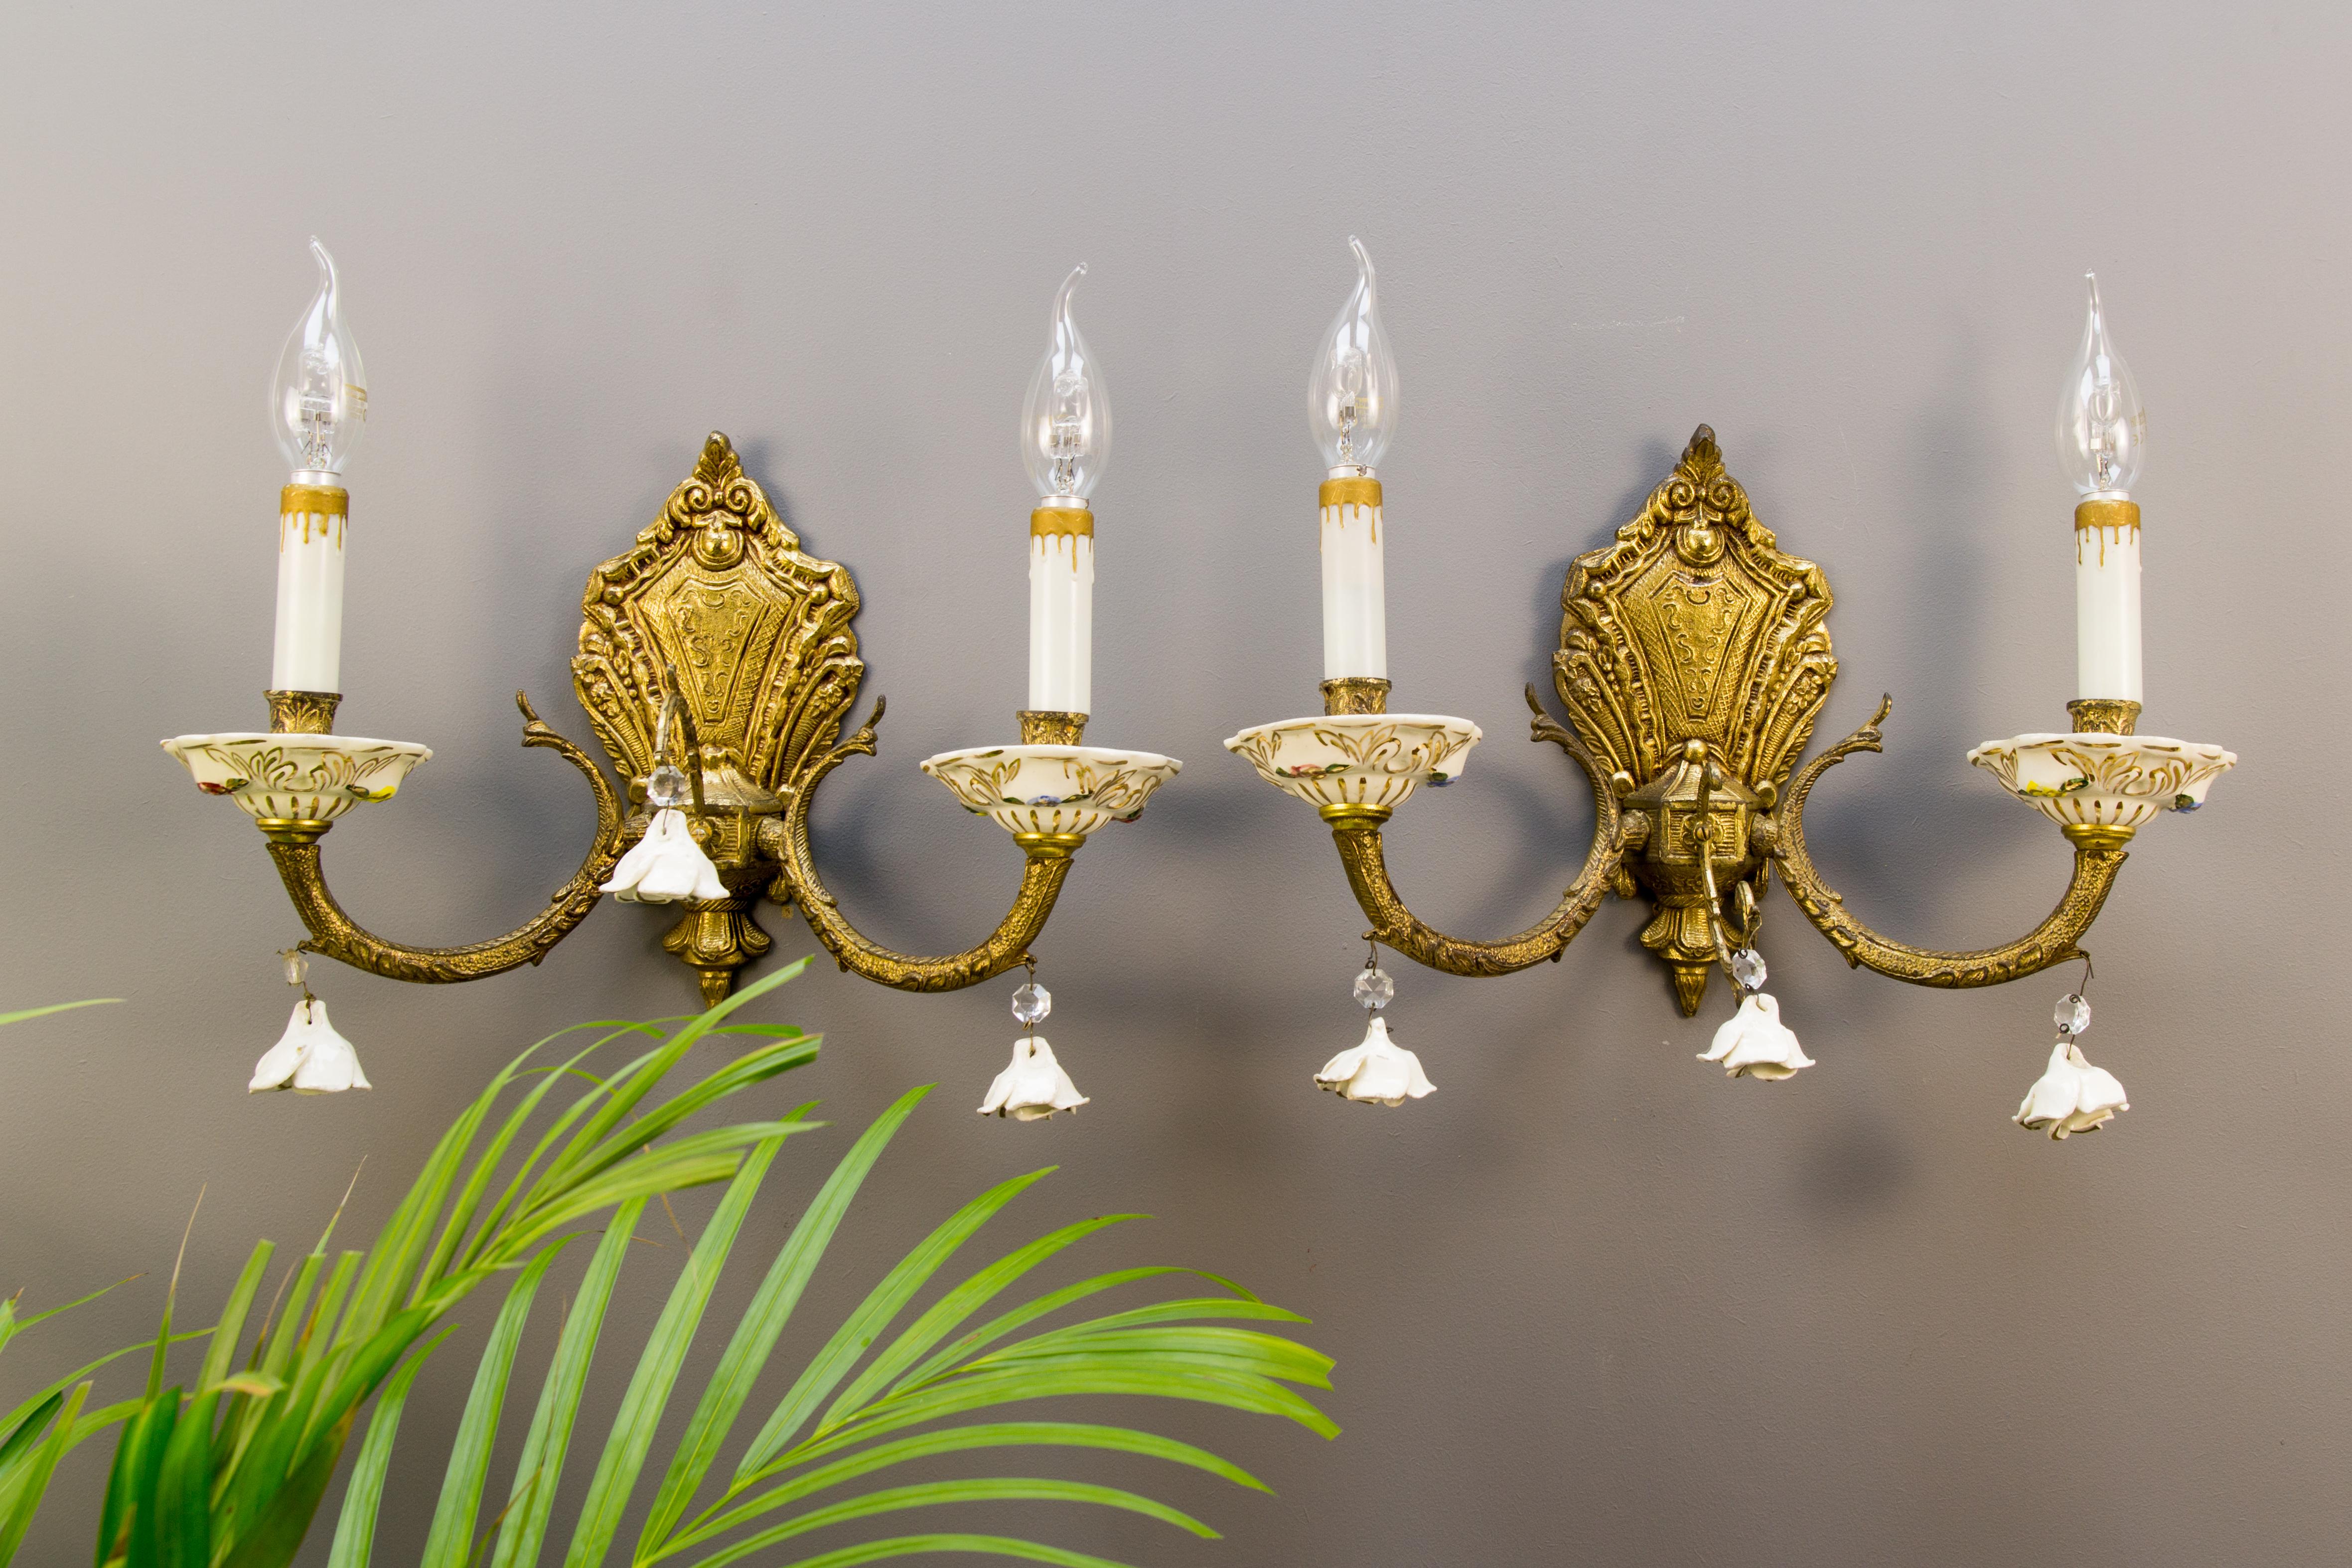 Pair of Italian bronze sconces decorated with porcelain roses and porcelain bobeches. Each arm has a socket for E14 light bulb.
Dimensions (each sconce without light bulbs):
Measures: Height 27 cm / 10.62 in; width 37 cm / 14.56 in; depth 11 cm /